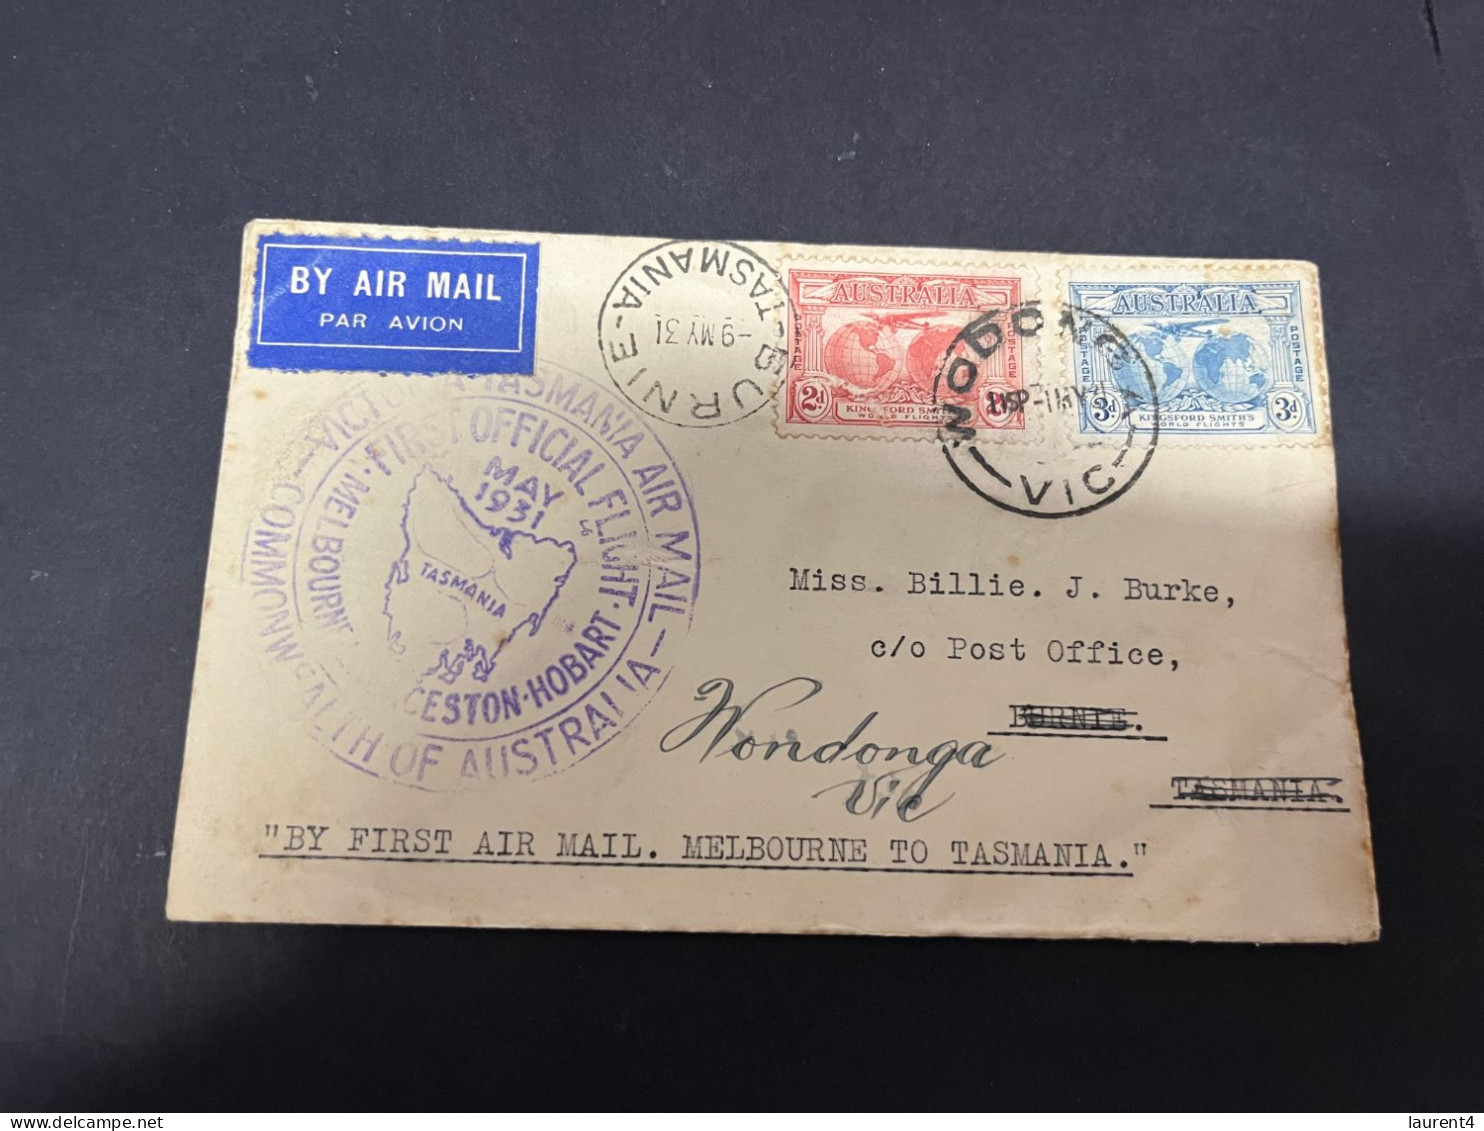 3-3-2024 (2 Y 3) Posted 1931 - First Air Mail From Melbourne To Tasmania (within Australia) - AIR MAIL Letter - Primeros Vuelos